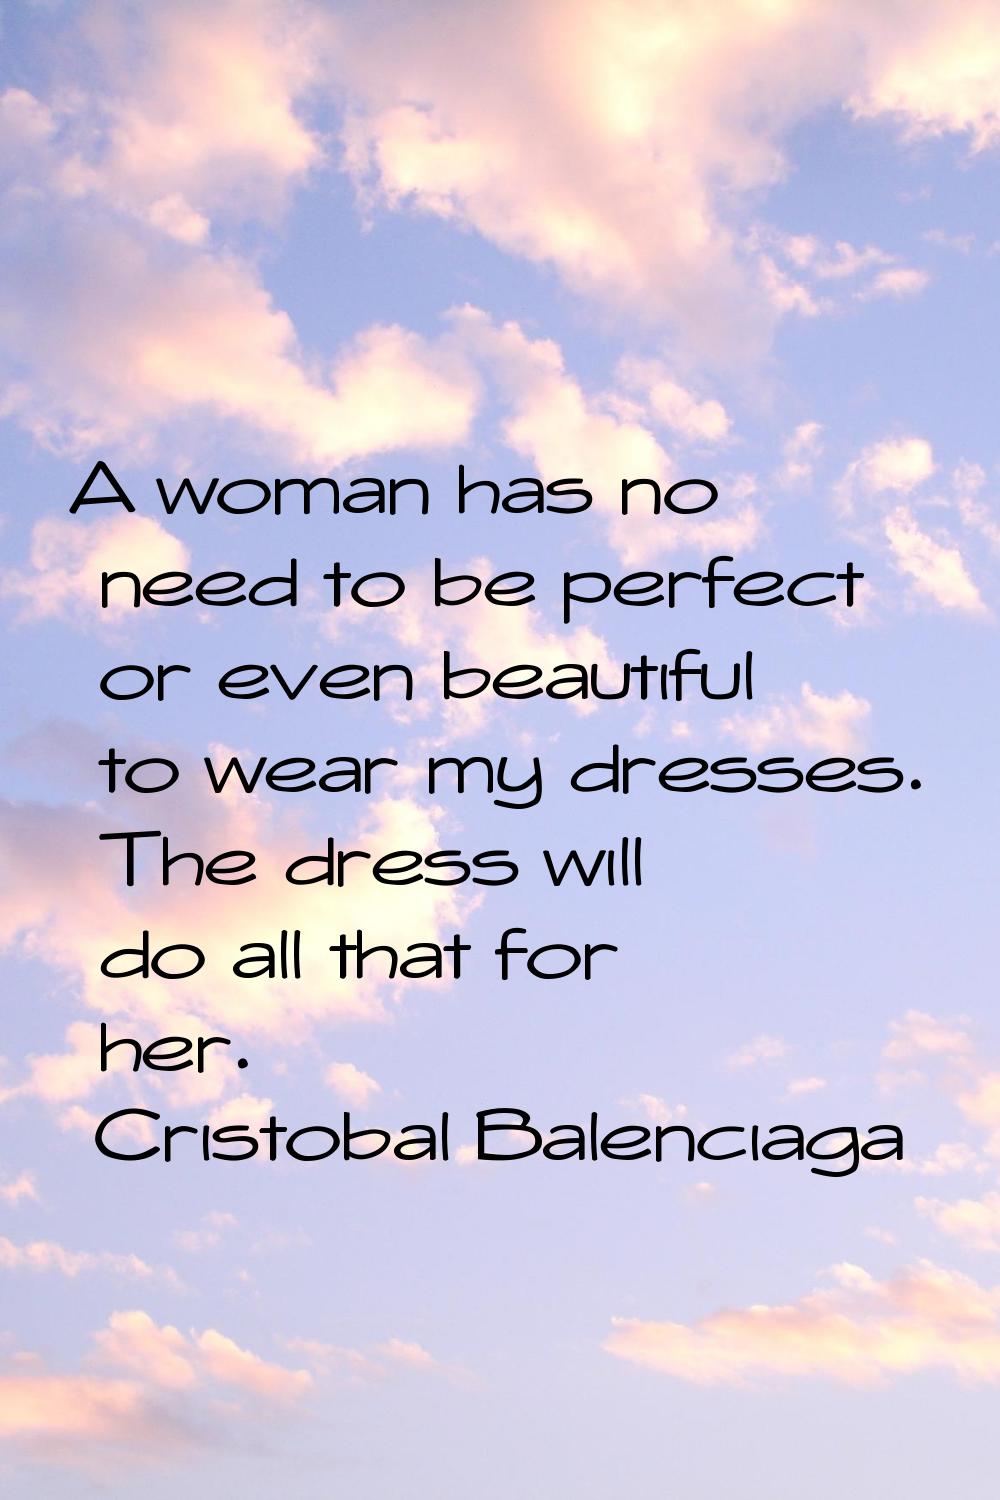 A woman has no need to be perfect or even beautiful to wear my dresses. The dress will do all that 